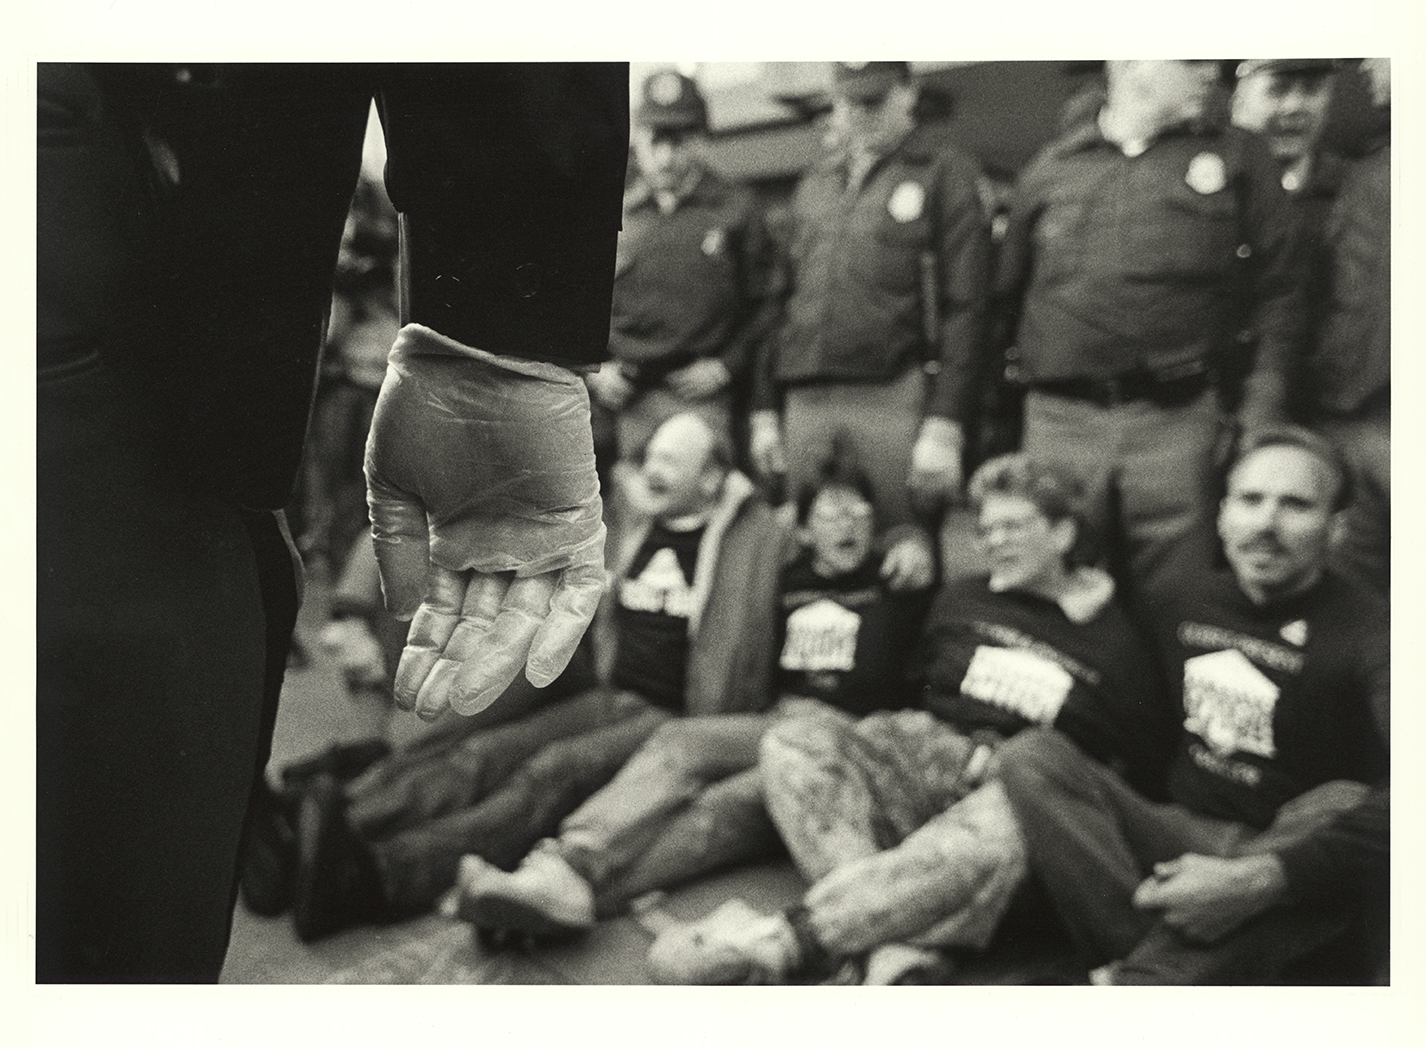 Ben Thornberry's photo of a police person wearing rubber gloves at an ACT UP demonstration in 1988